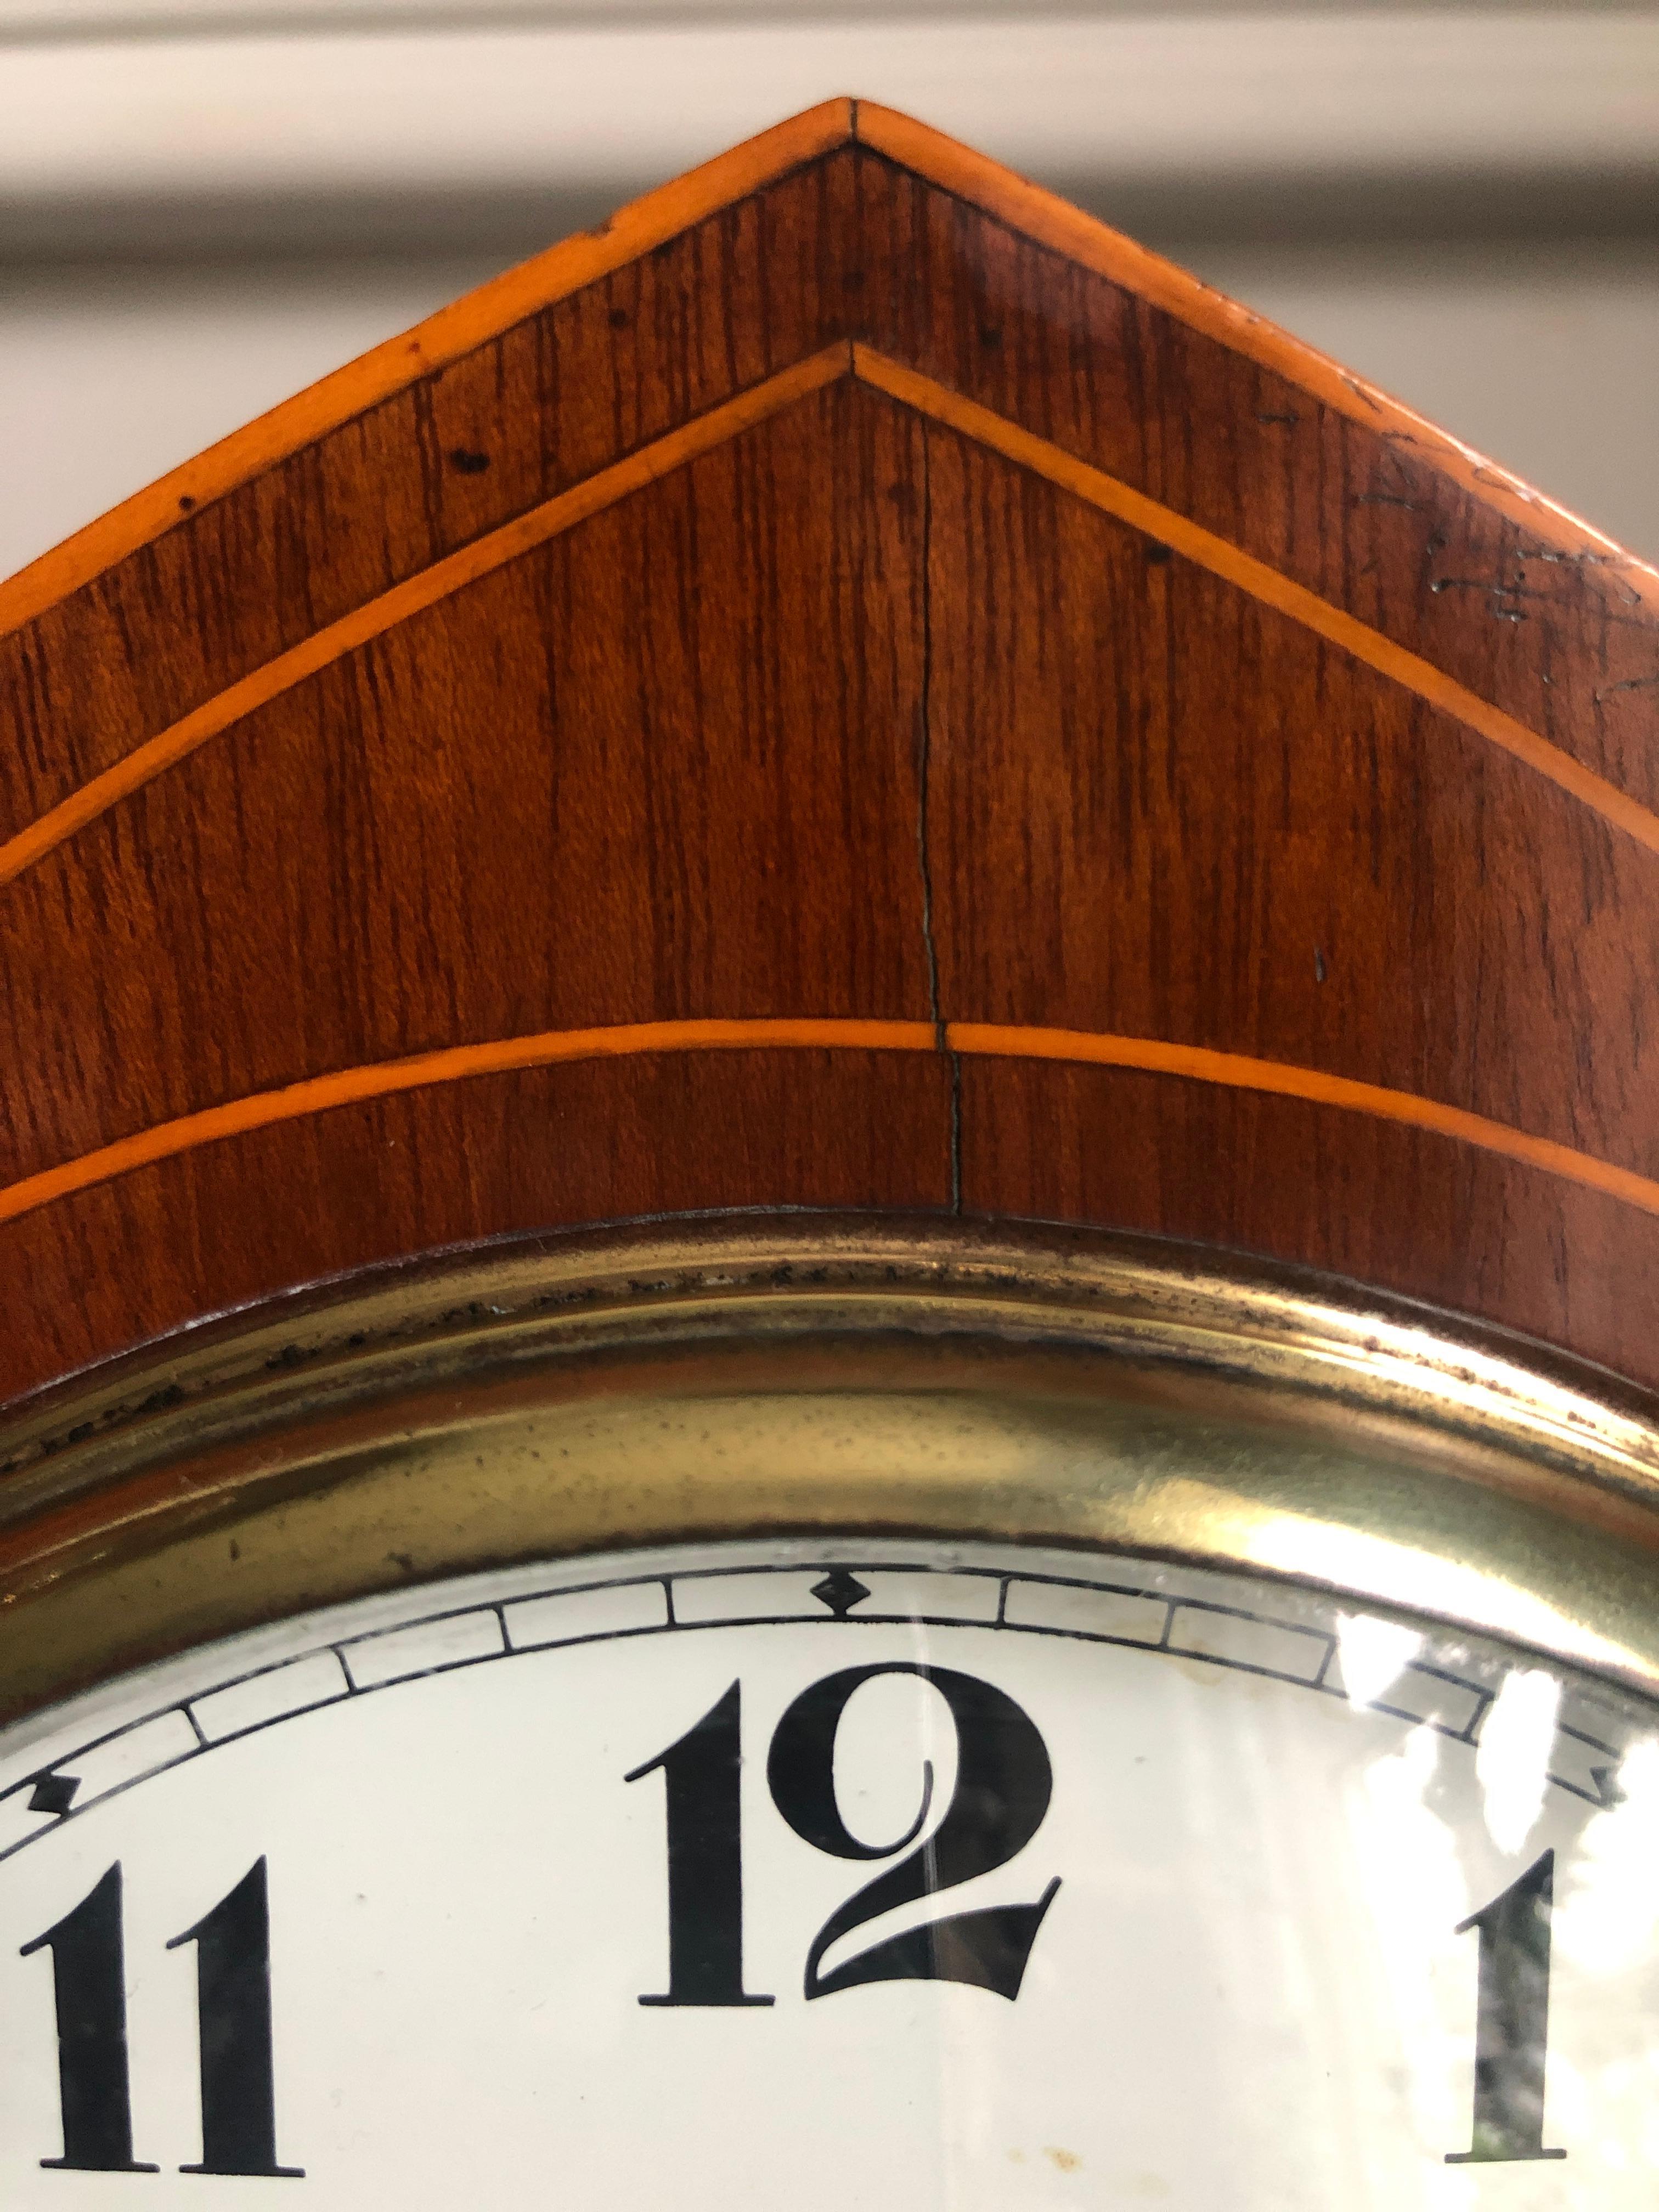 Antique Edwardian mahogany lancet top mantel clock having attractive inlaid boxwood stringing and a satinwood fan inlay to the front of the case. The French movement has a white enamel dial and the antique clock strikes the hours and half hour on a